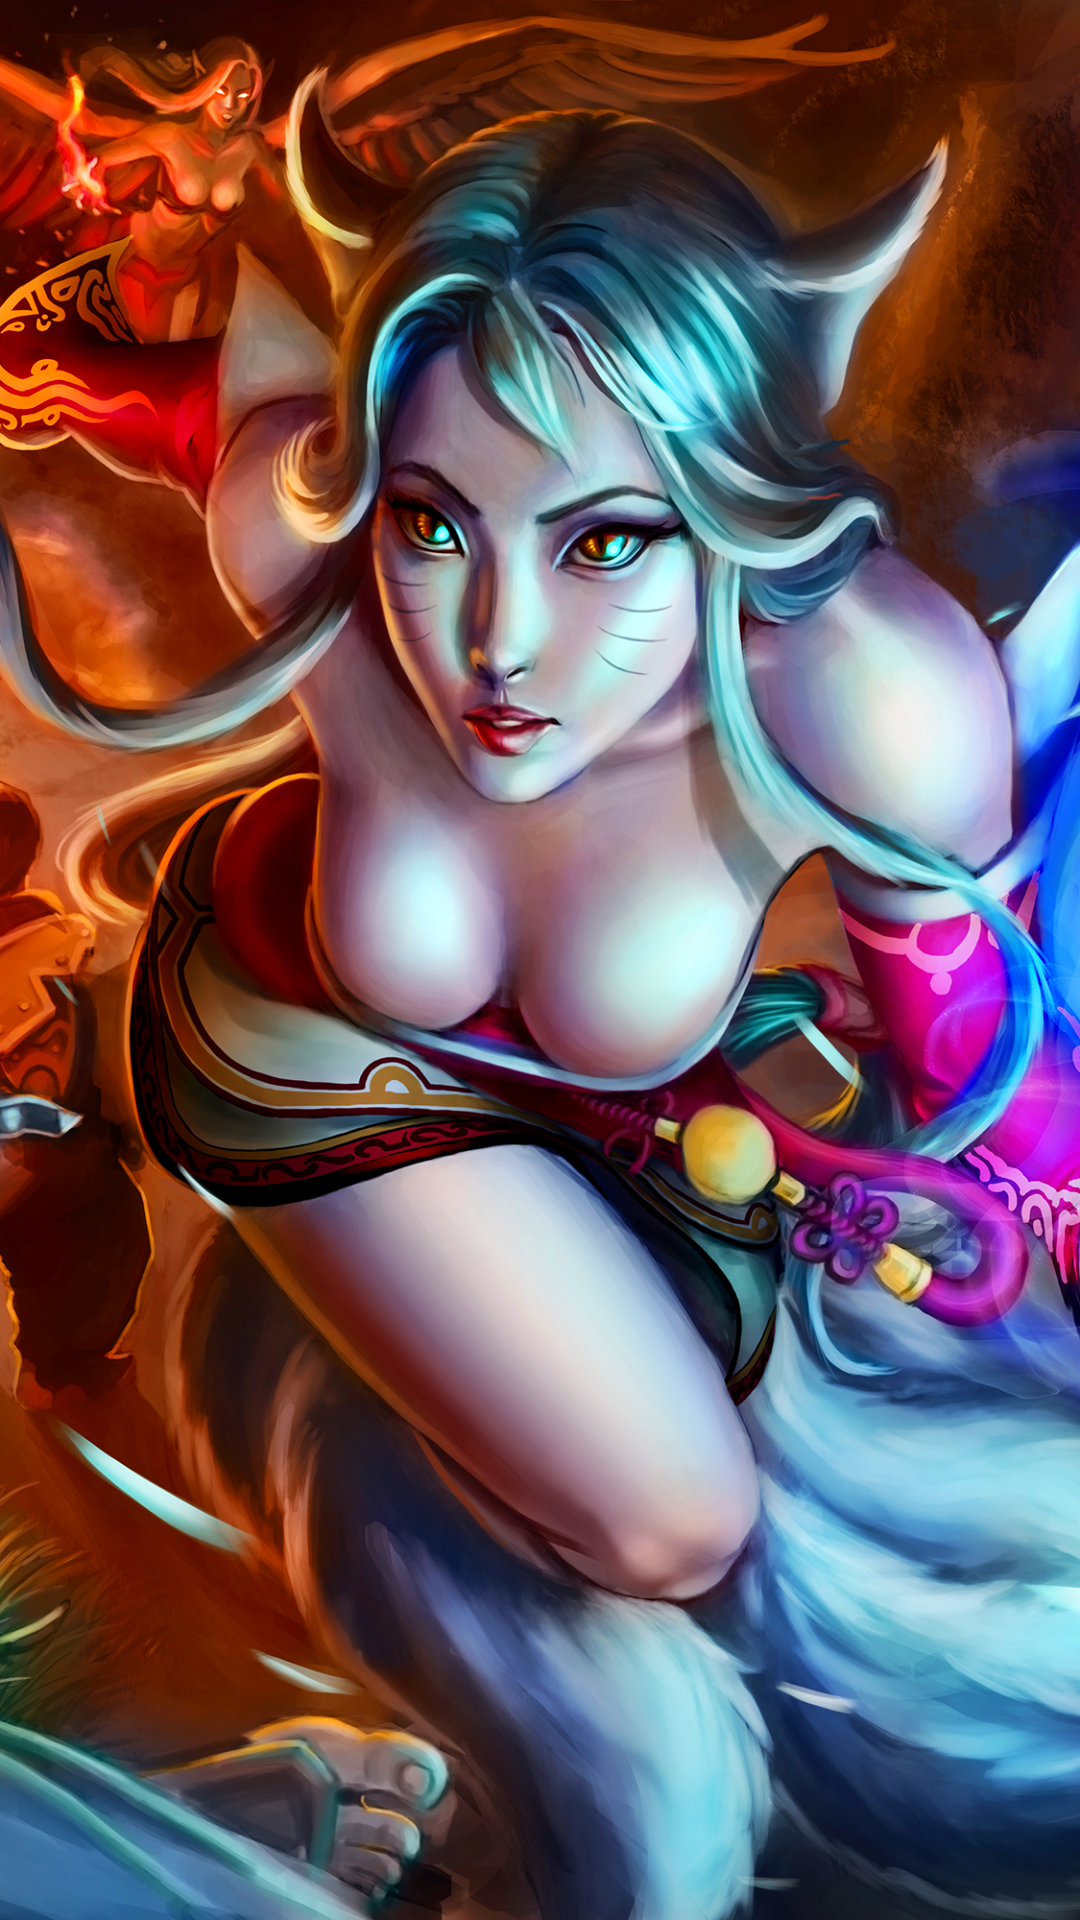 Download mobile wallpaper League Of Legends, Video Game, Morgana (League Of Legends), Yasuo (League Of Legends), Malphite (League Of Legends), Blitzcrank (League Of Legends), Ahri (League Of Legends), Graves (League Of Legends) for free.